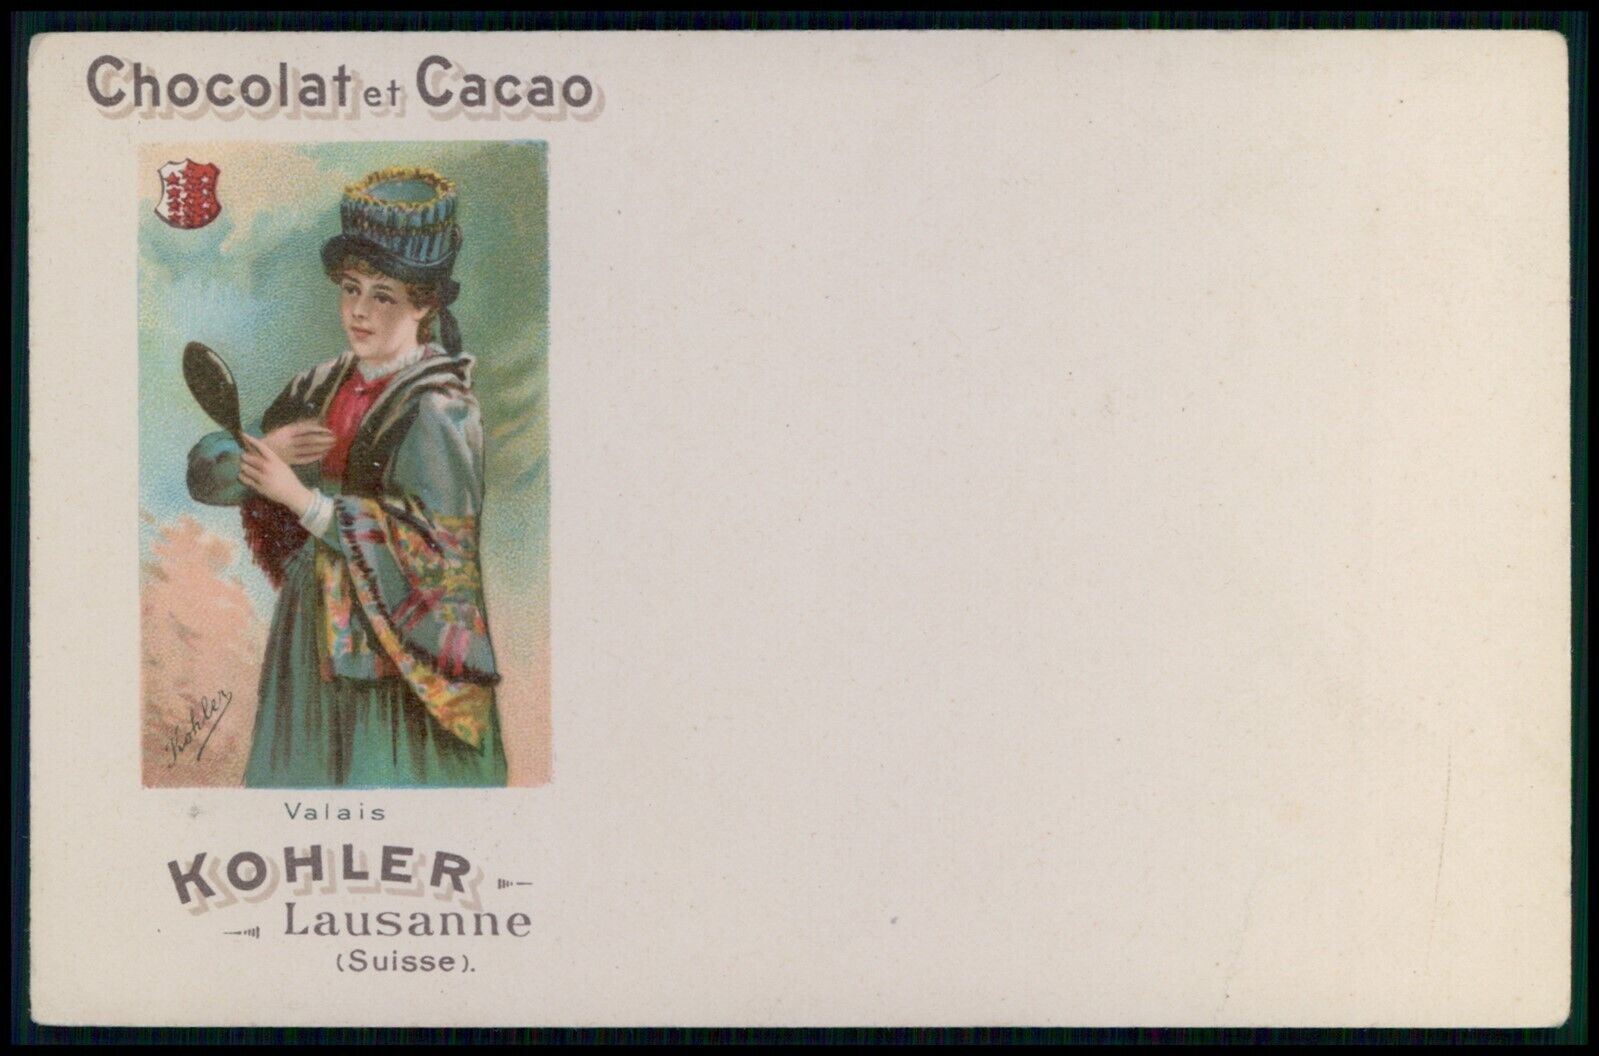 cc advertising Kohler cocoa and chocolate original old 1890s Swiss postcard